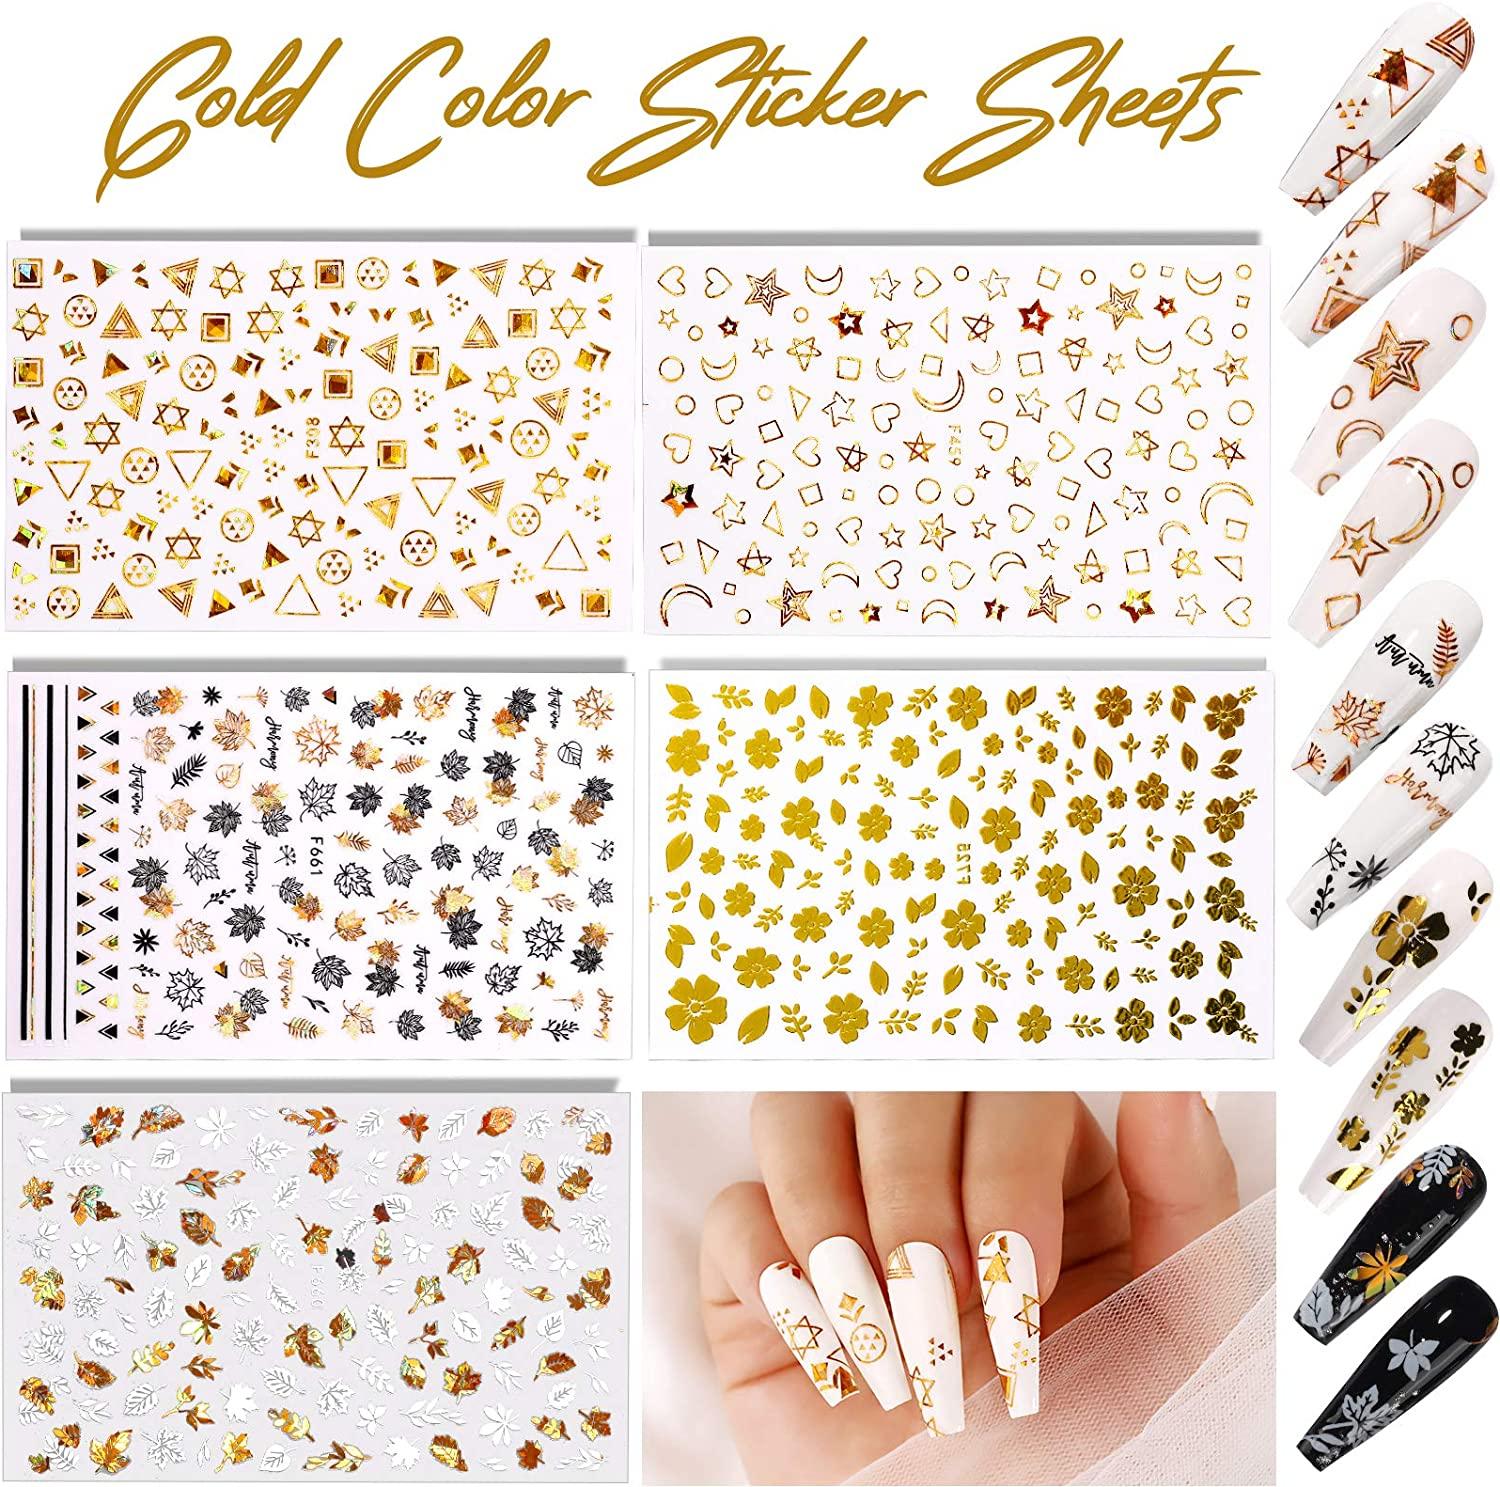 Fashion 3D Self-adhesive Nail Decals Flowers Butterfly Nail Sticker  Manicure Art | eBay